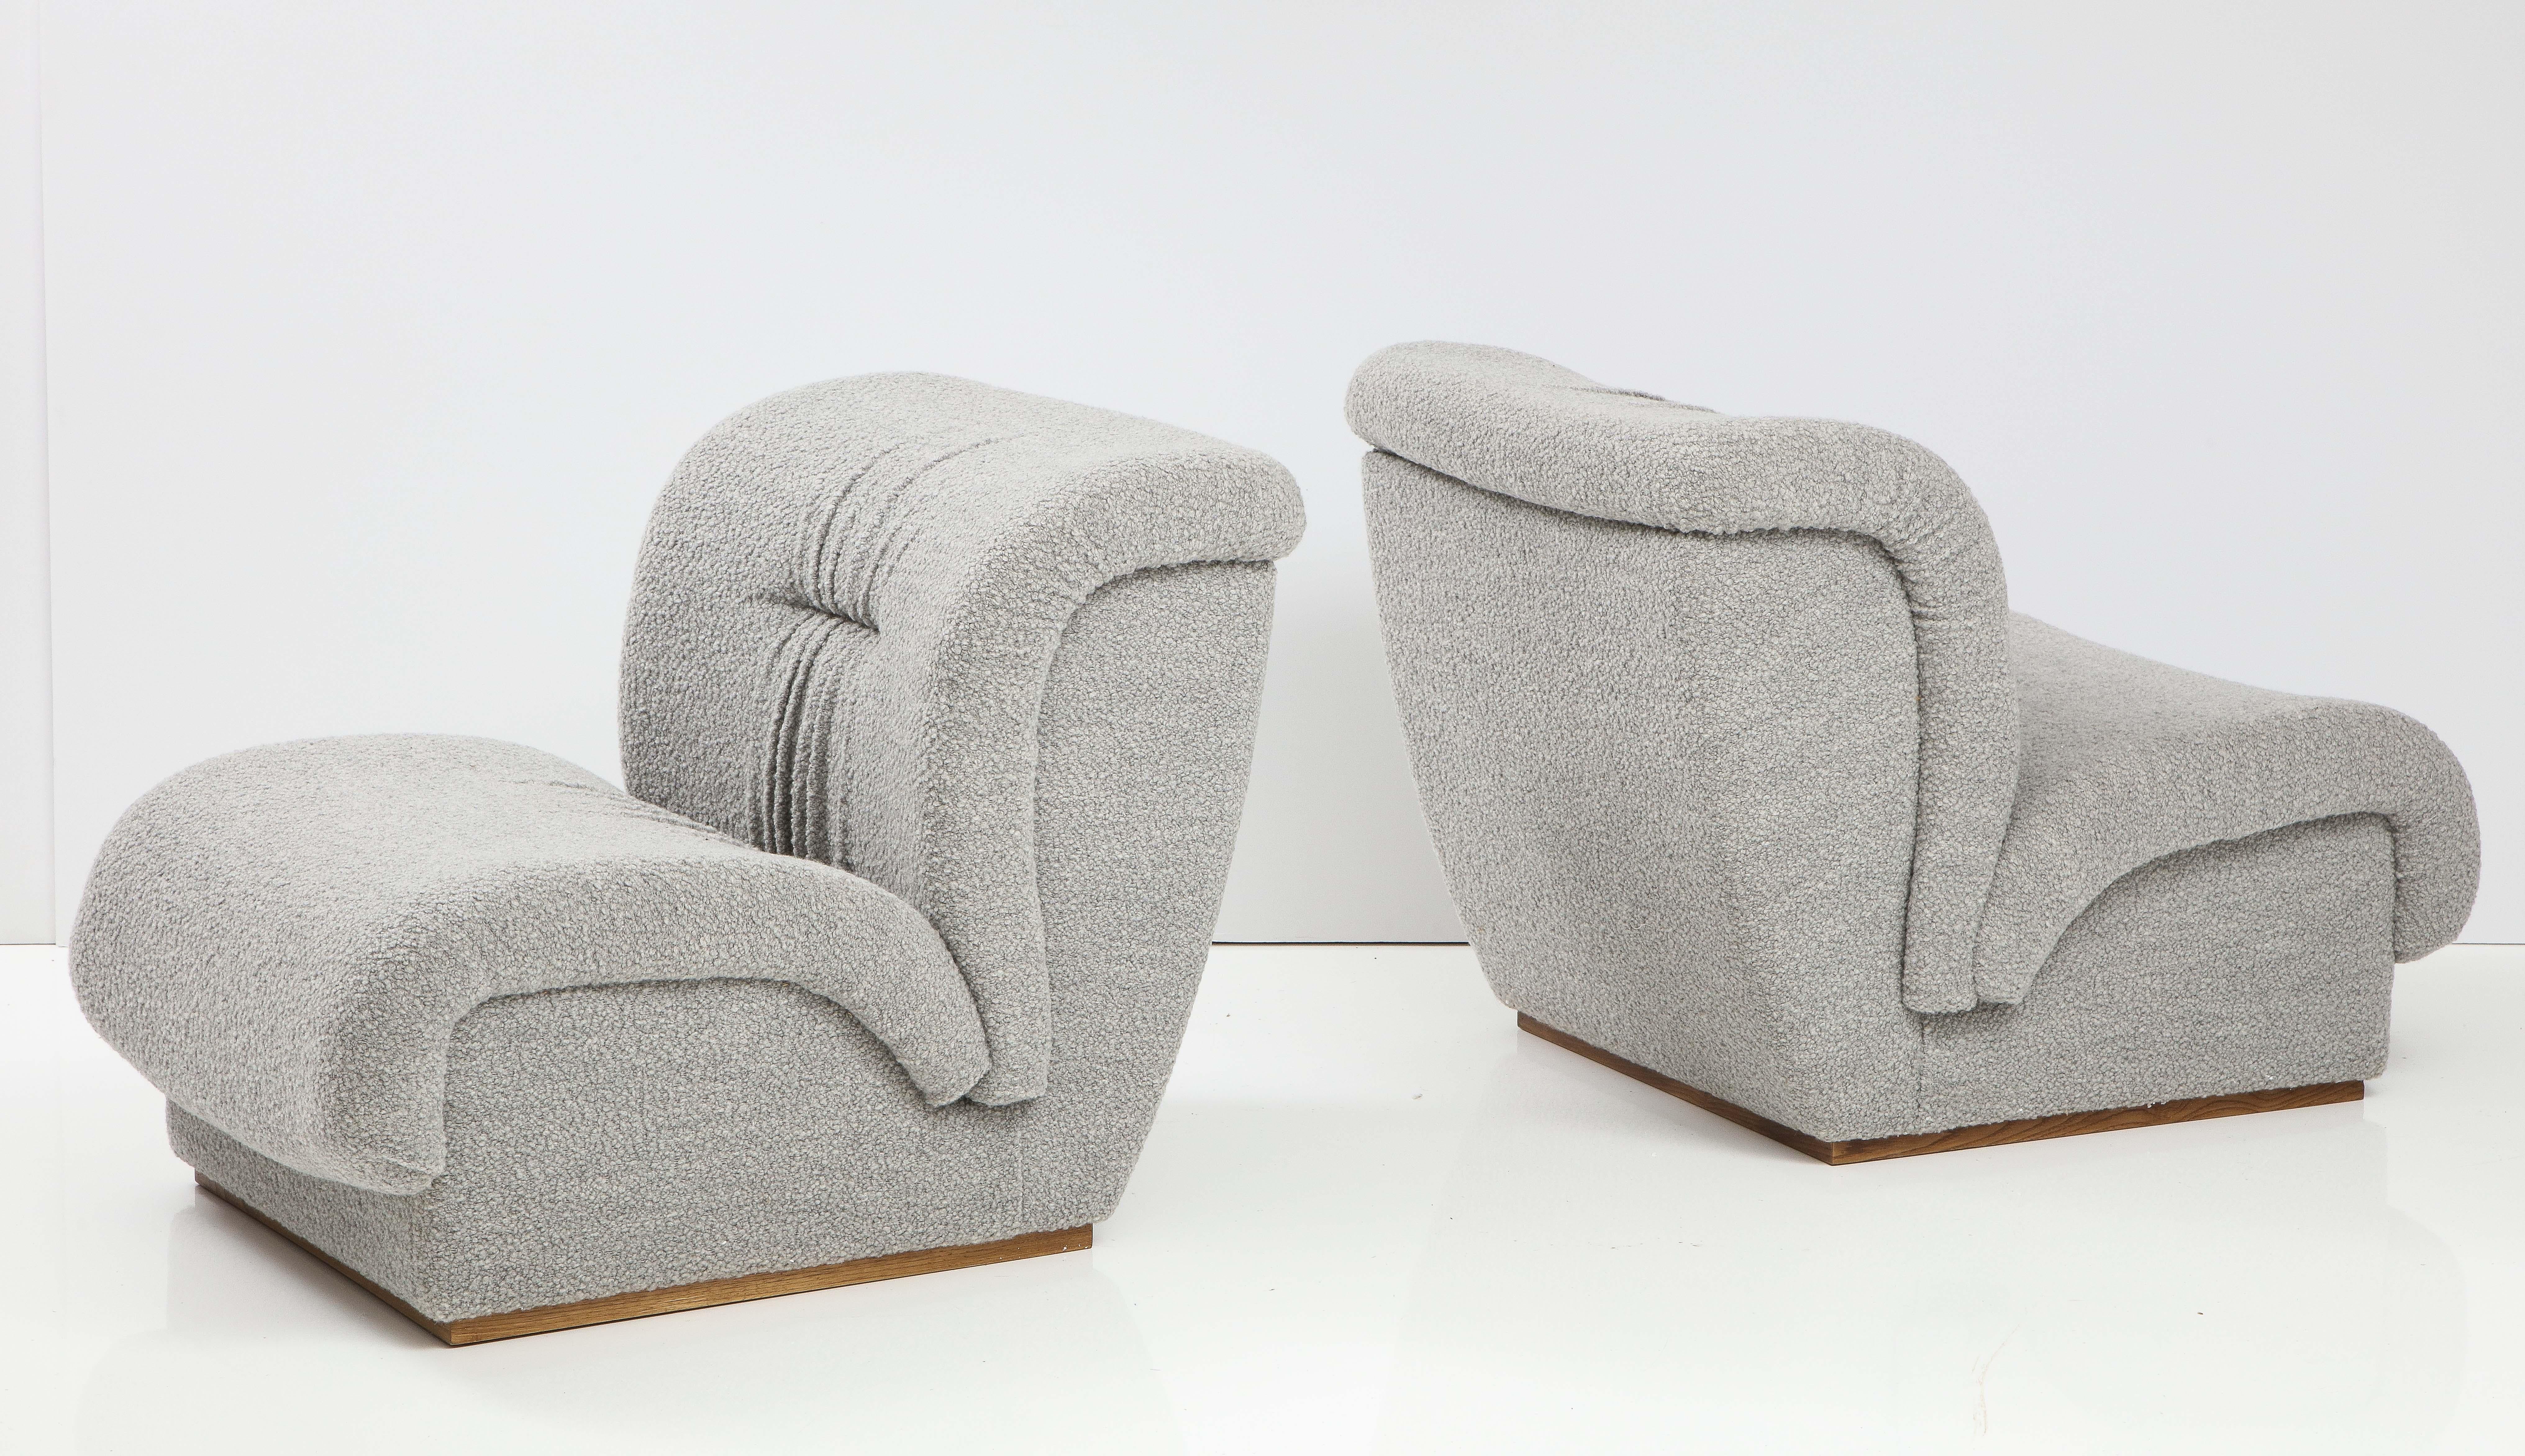 Pair of Slipper Lounge Chairs in Grey Boucle by Doimo Salotti, Italy, circa 1970 For Sale 2